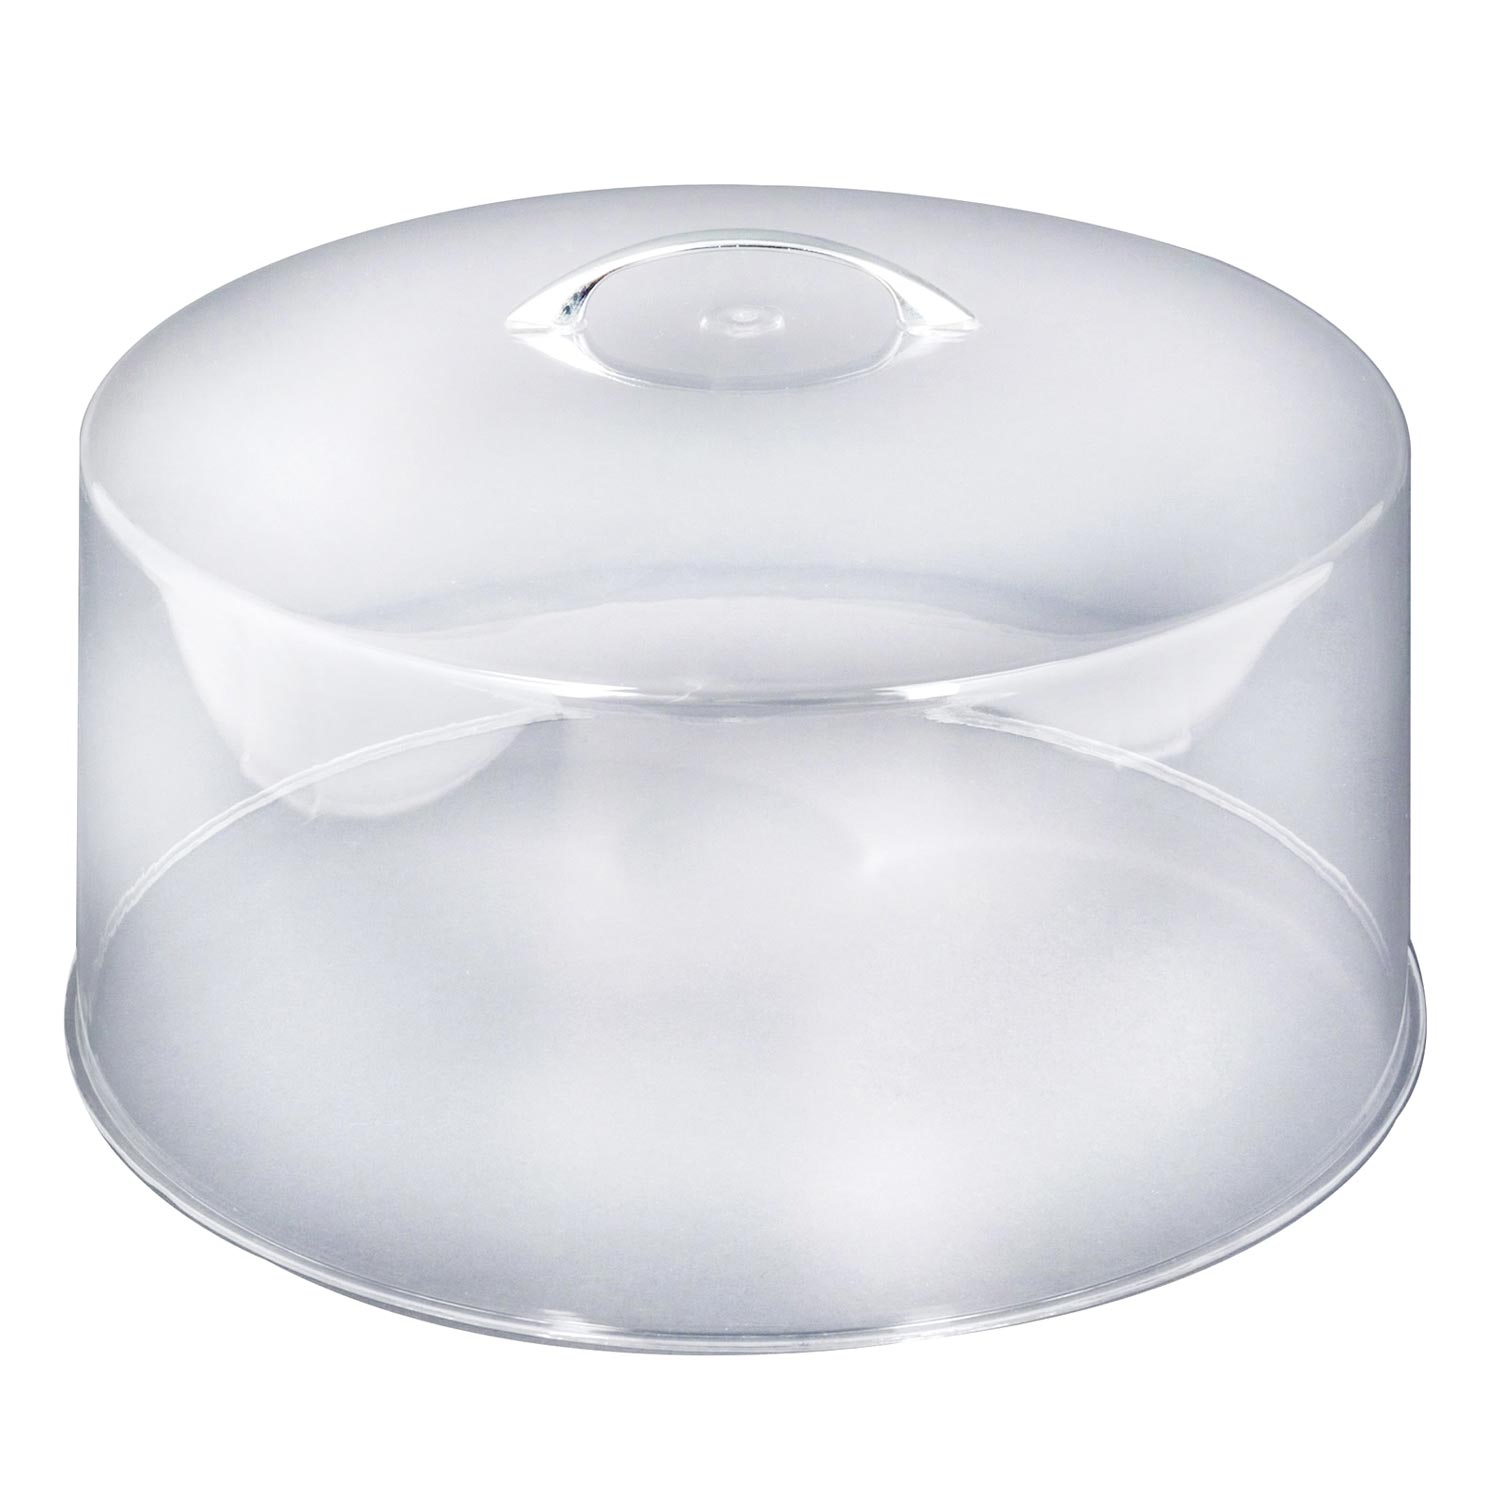 Cake Plate With Cover White 10 Inch | Nestasia